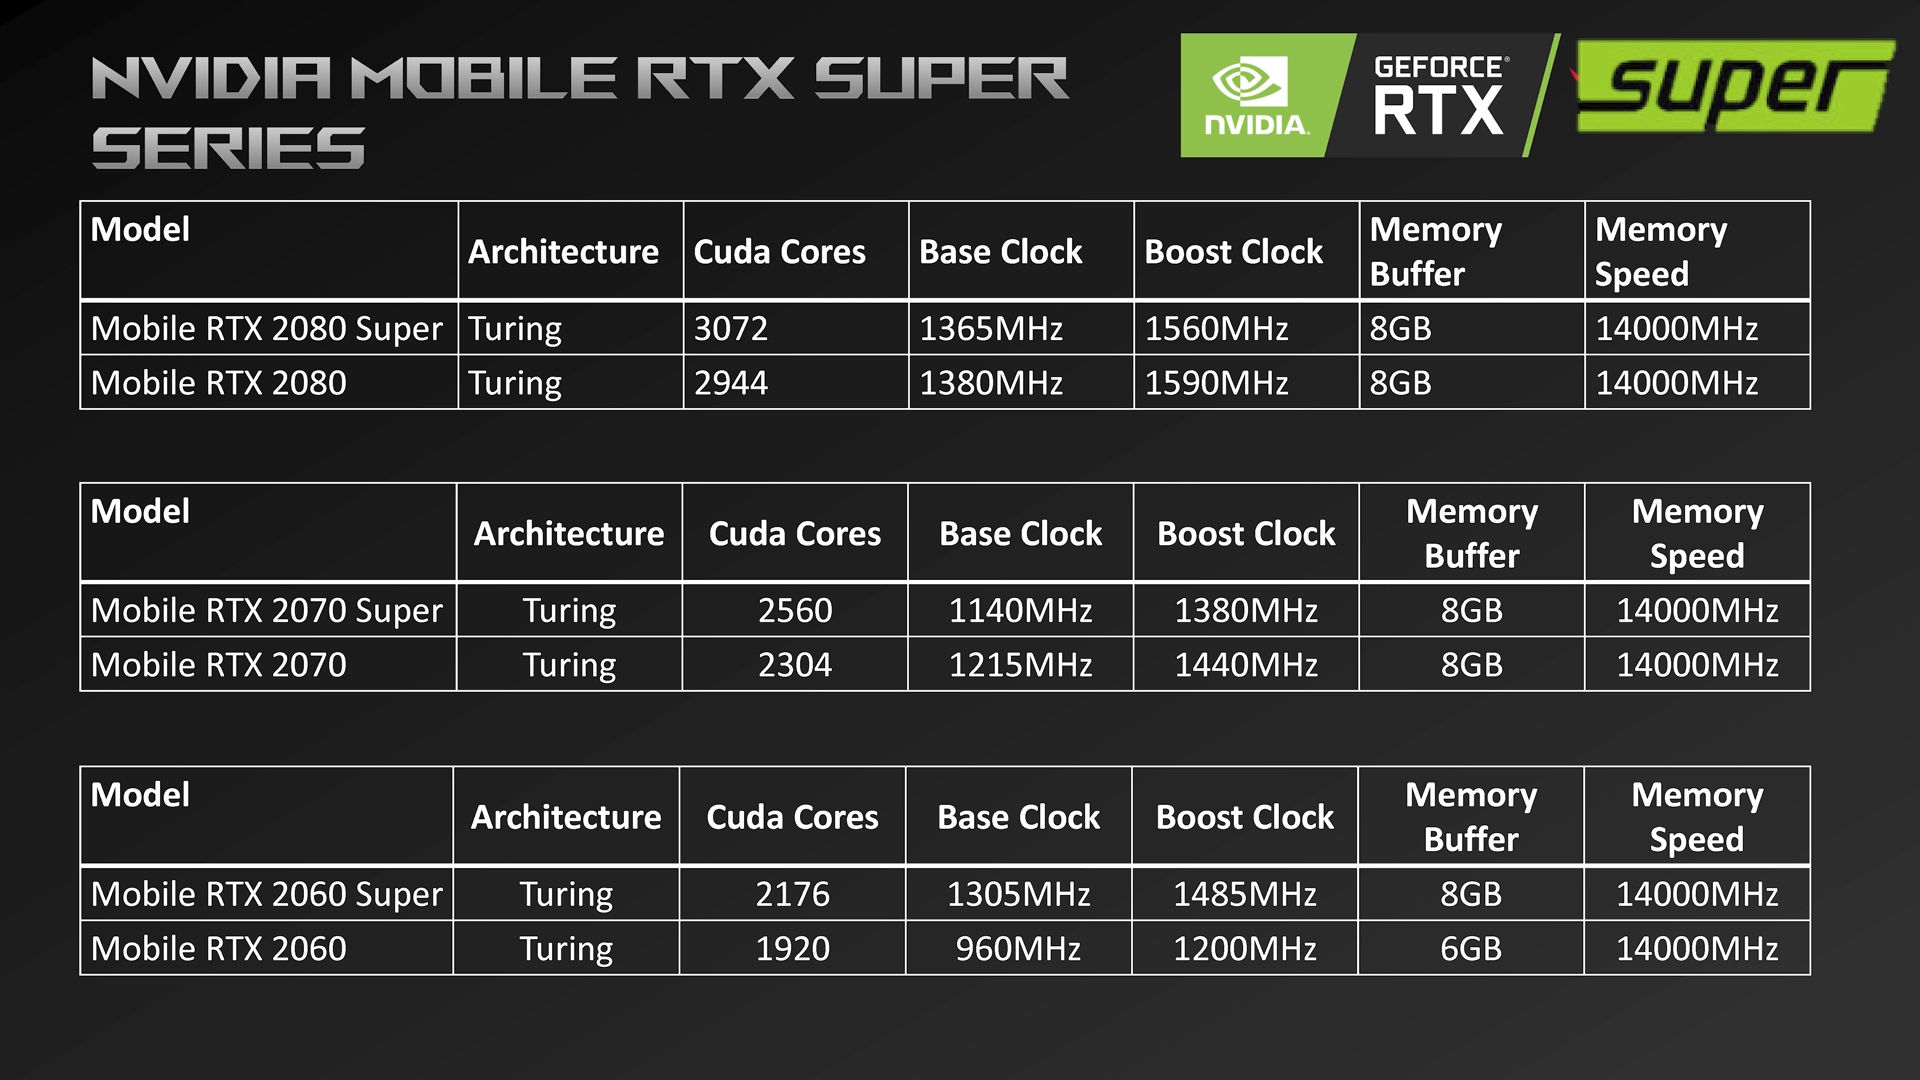 foragte Pick up blade ego ASUS claims GeForce RTX 2060 SUPER Mobile exists - VideoCardz.com